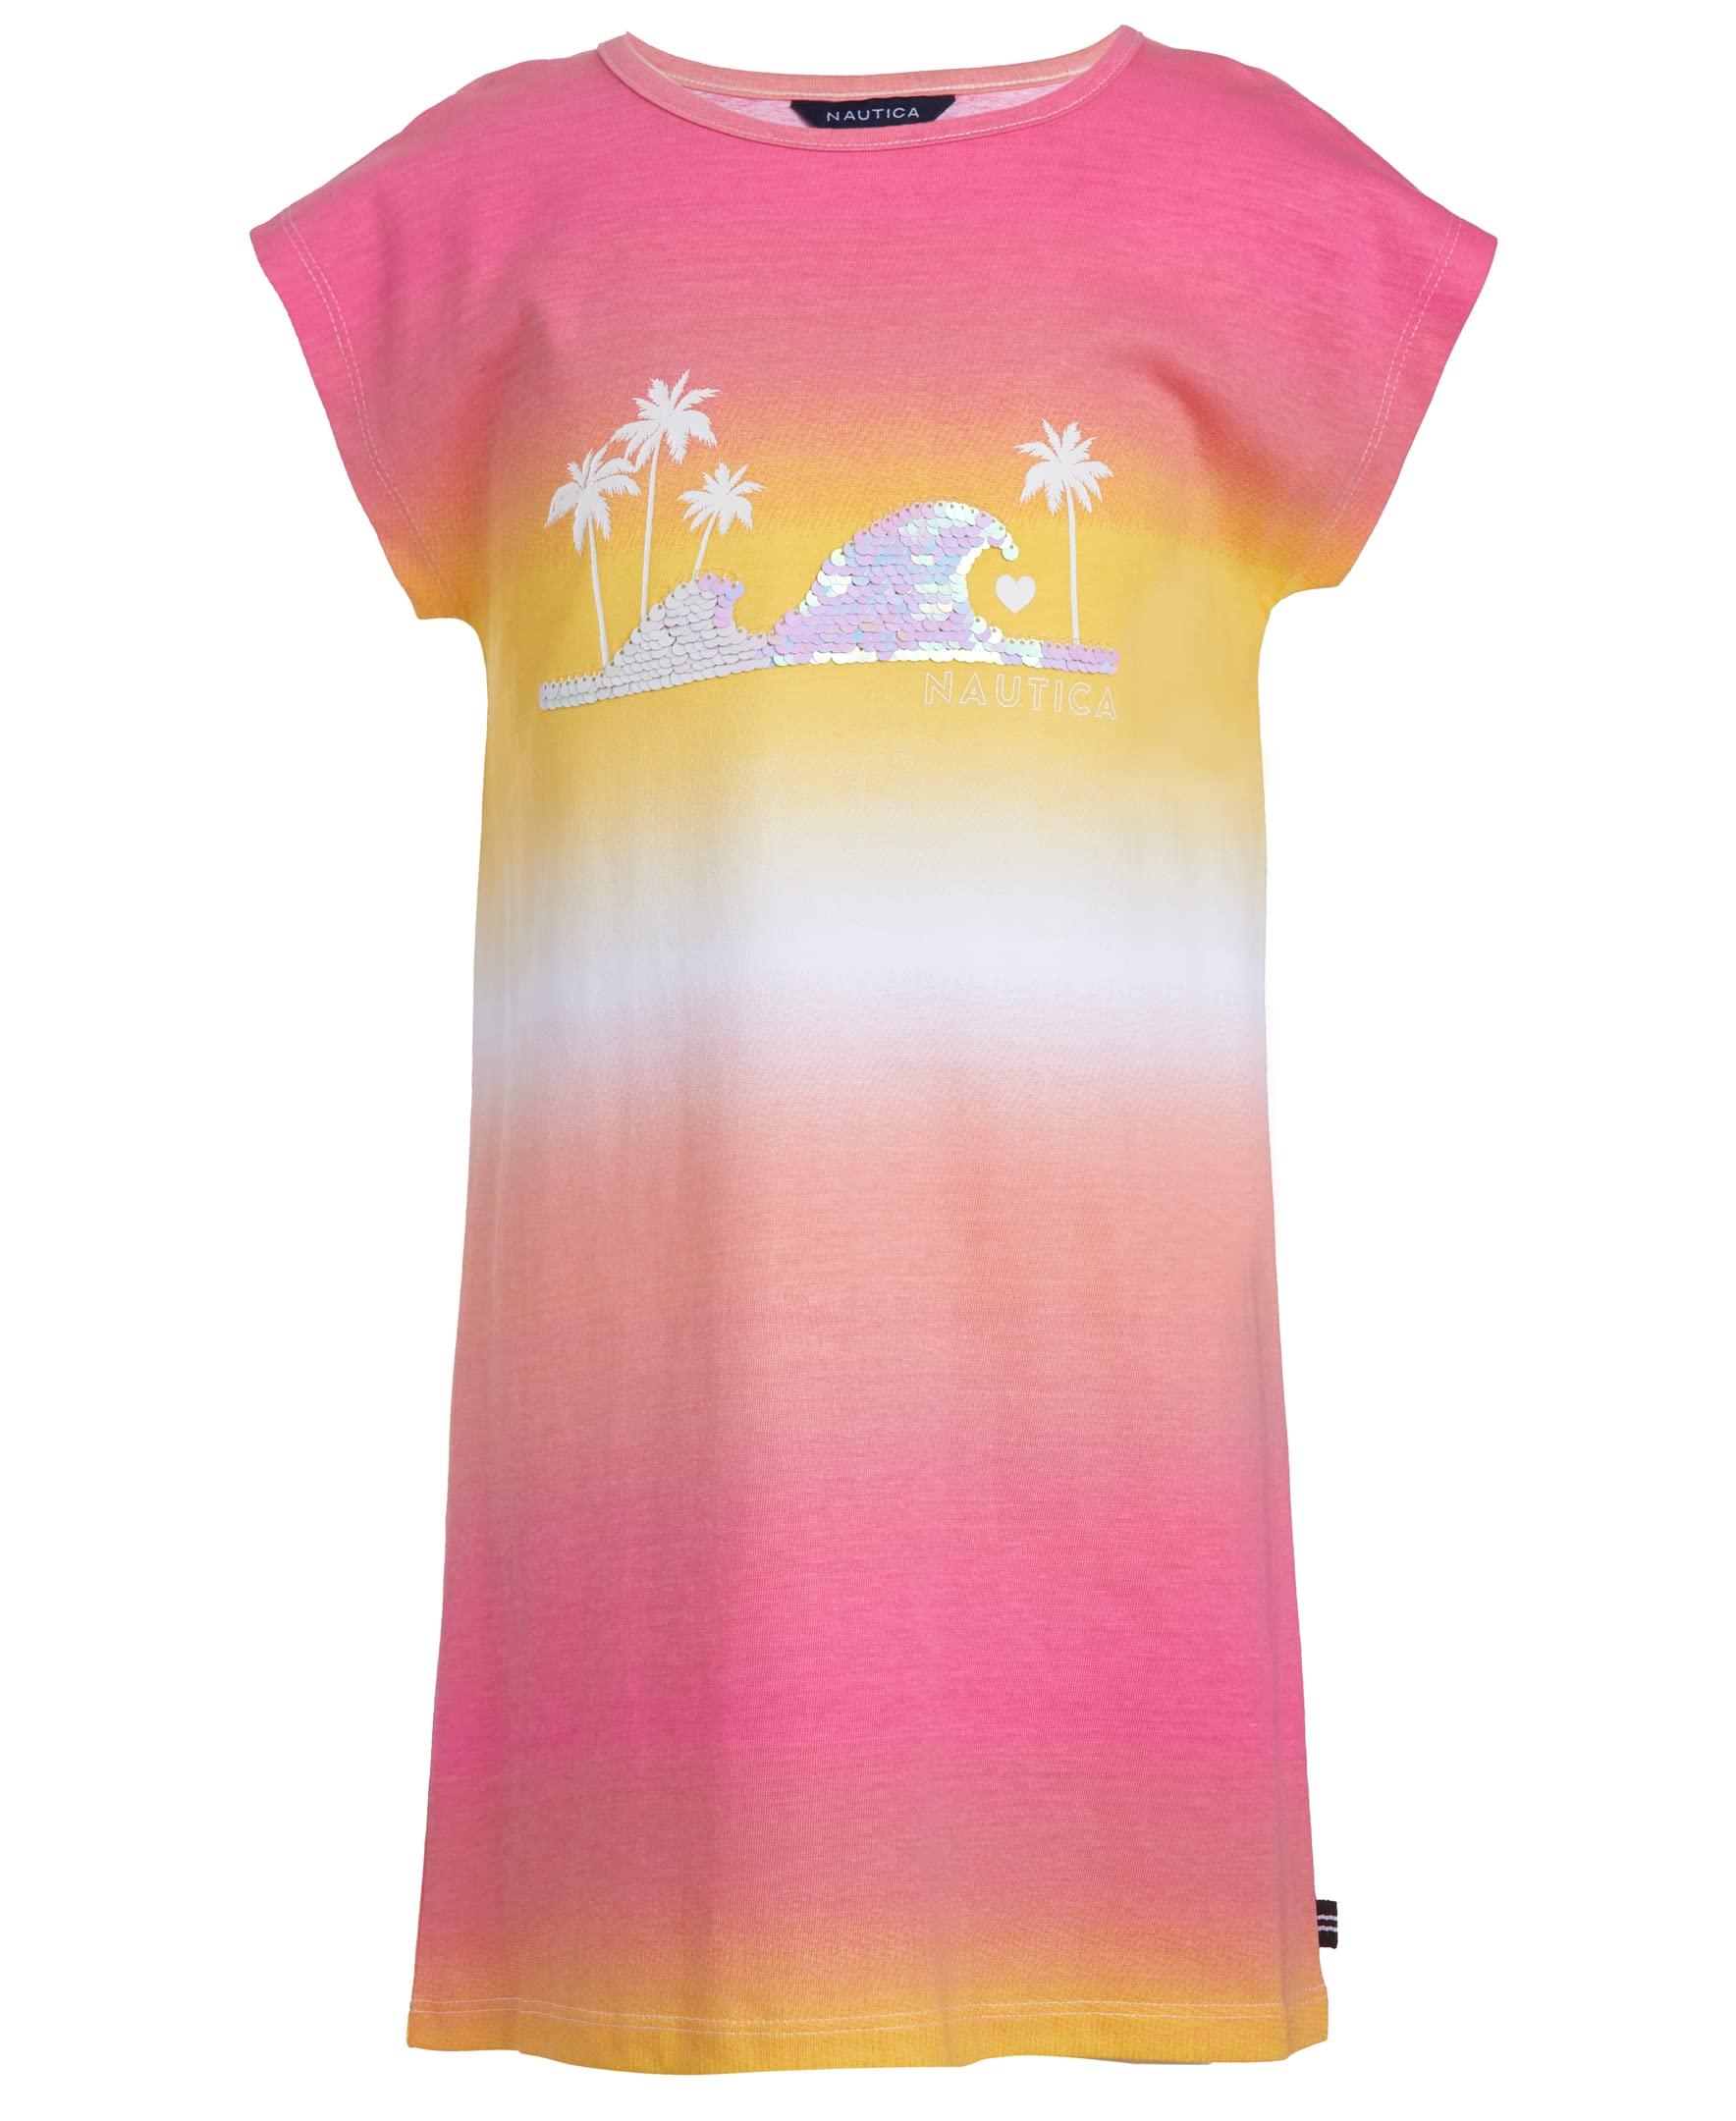 Nautica Girls' Short Sleeve Jersey Tee Dress with Elastic Cinched Waist, Fun Designs & Colors, Pink Carnation Wave, 6X